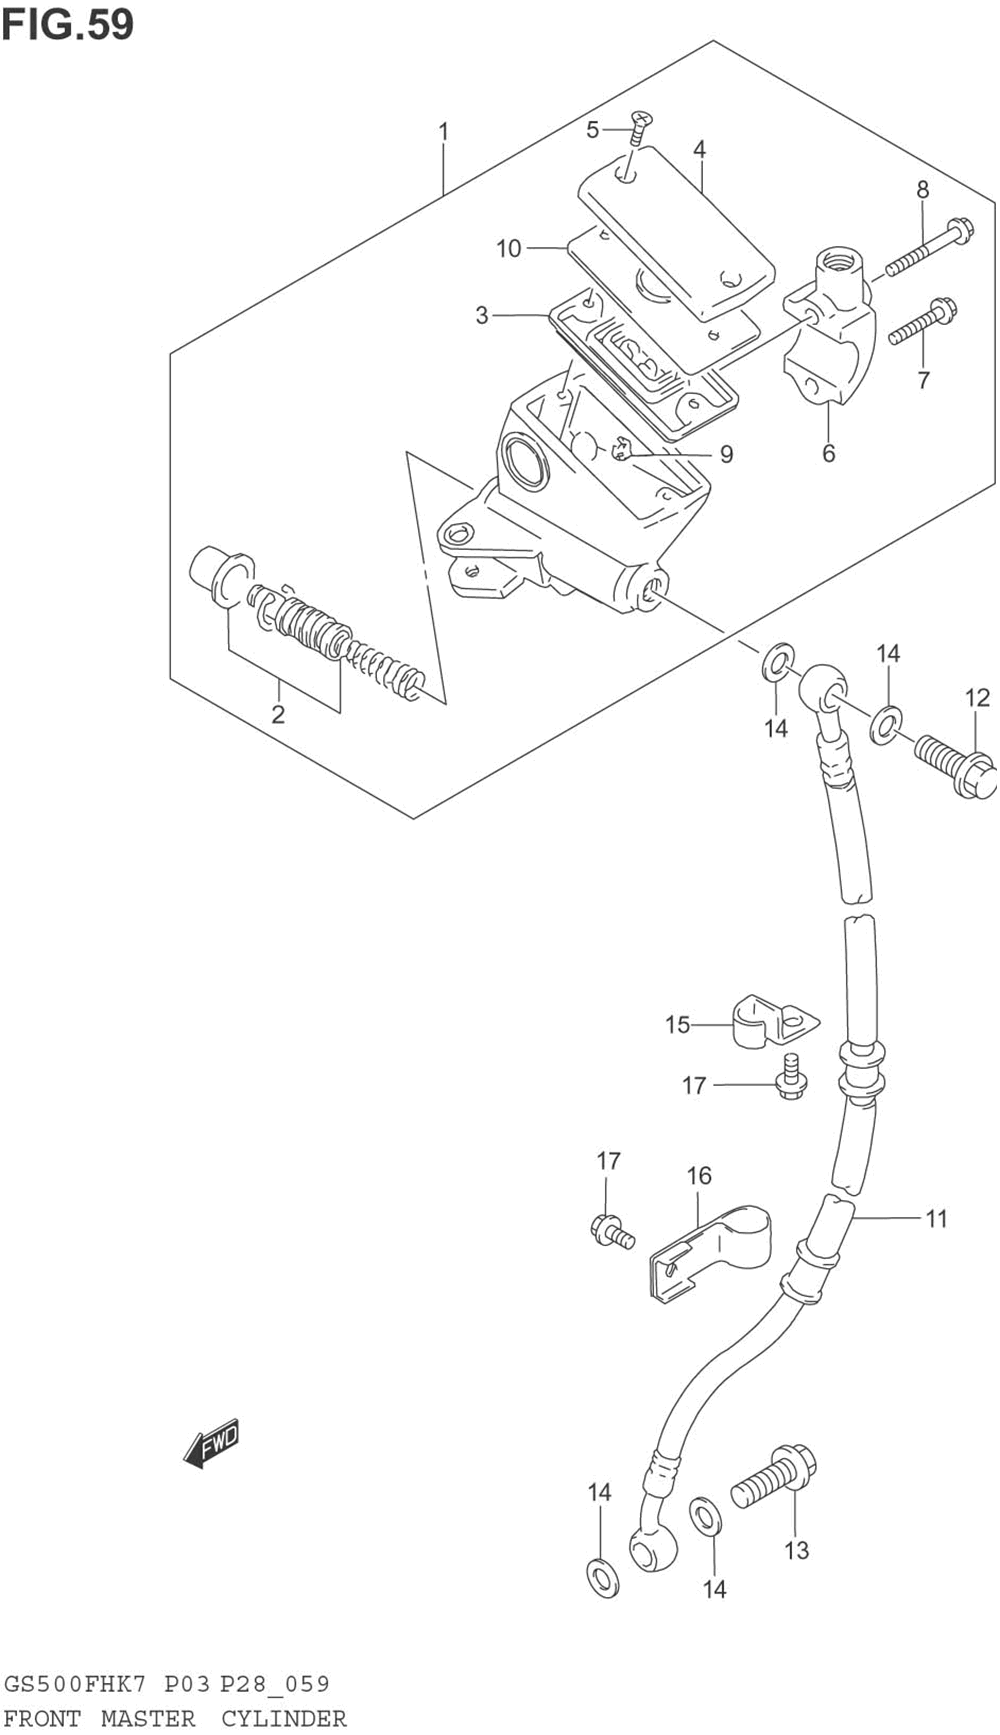 Front master cylinder (gs500h e28)